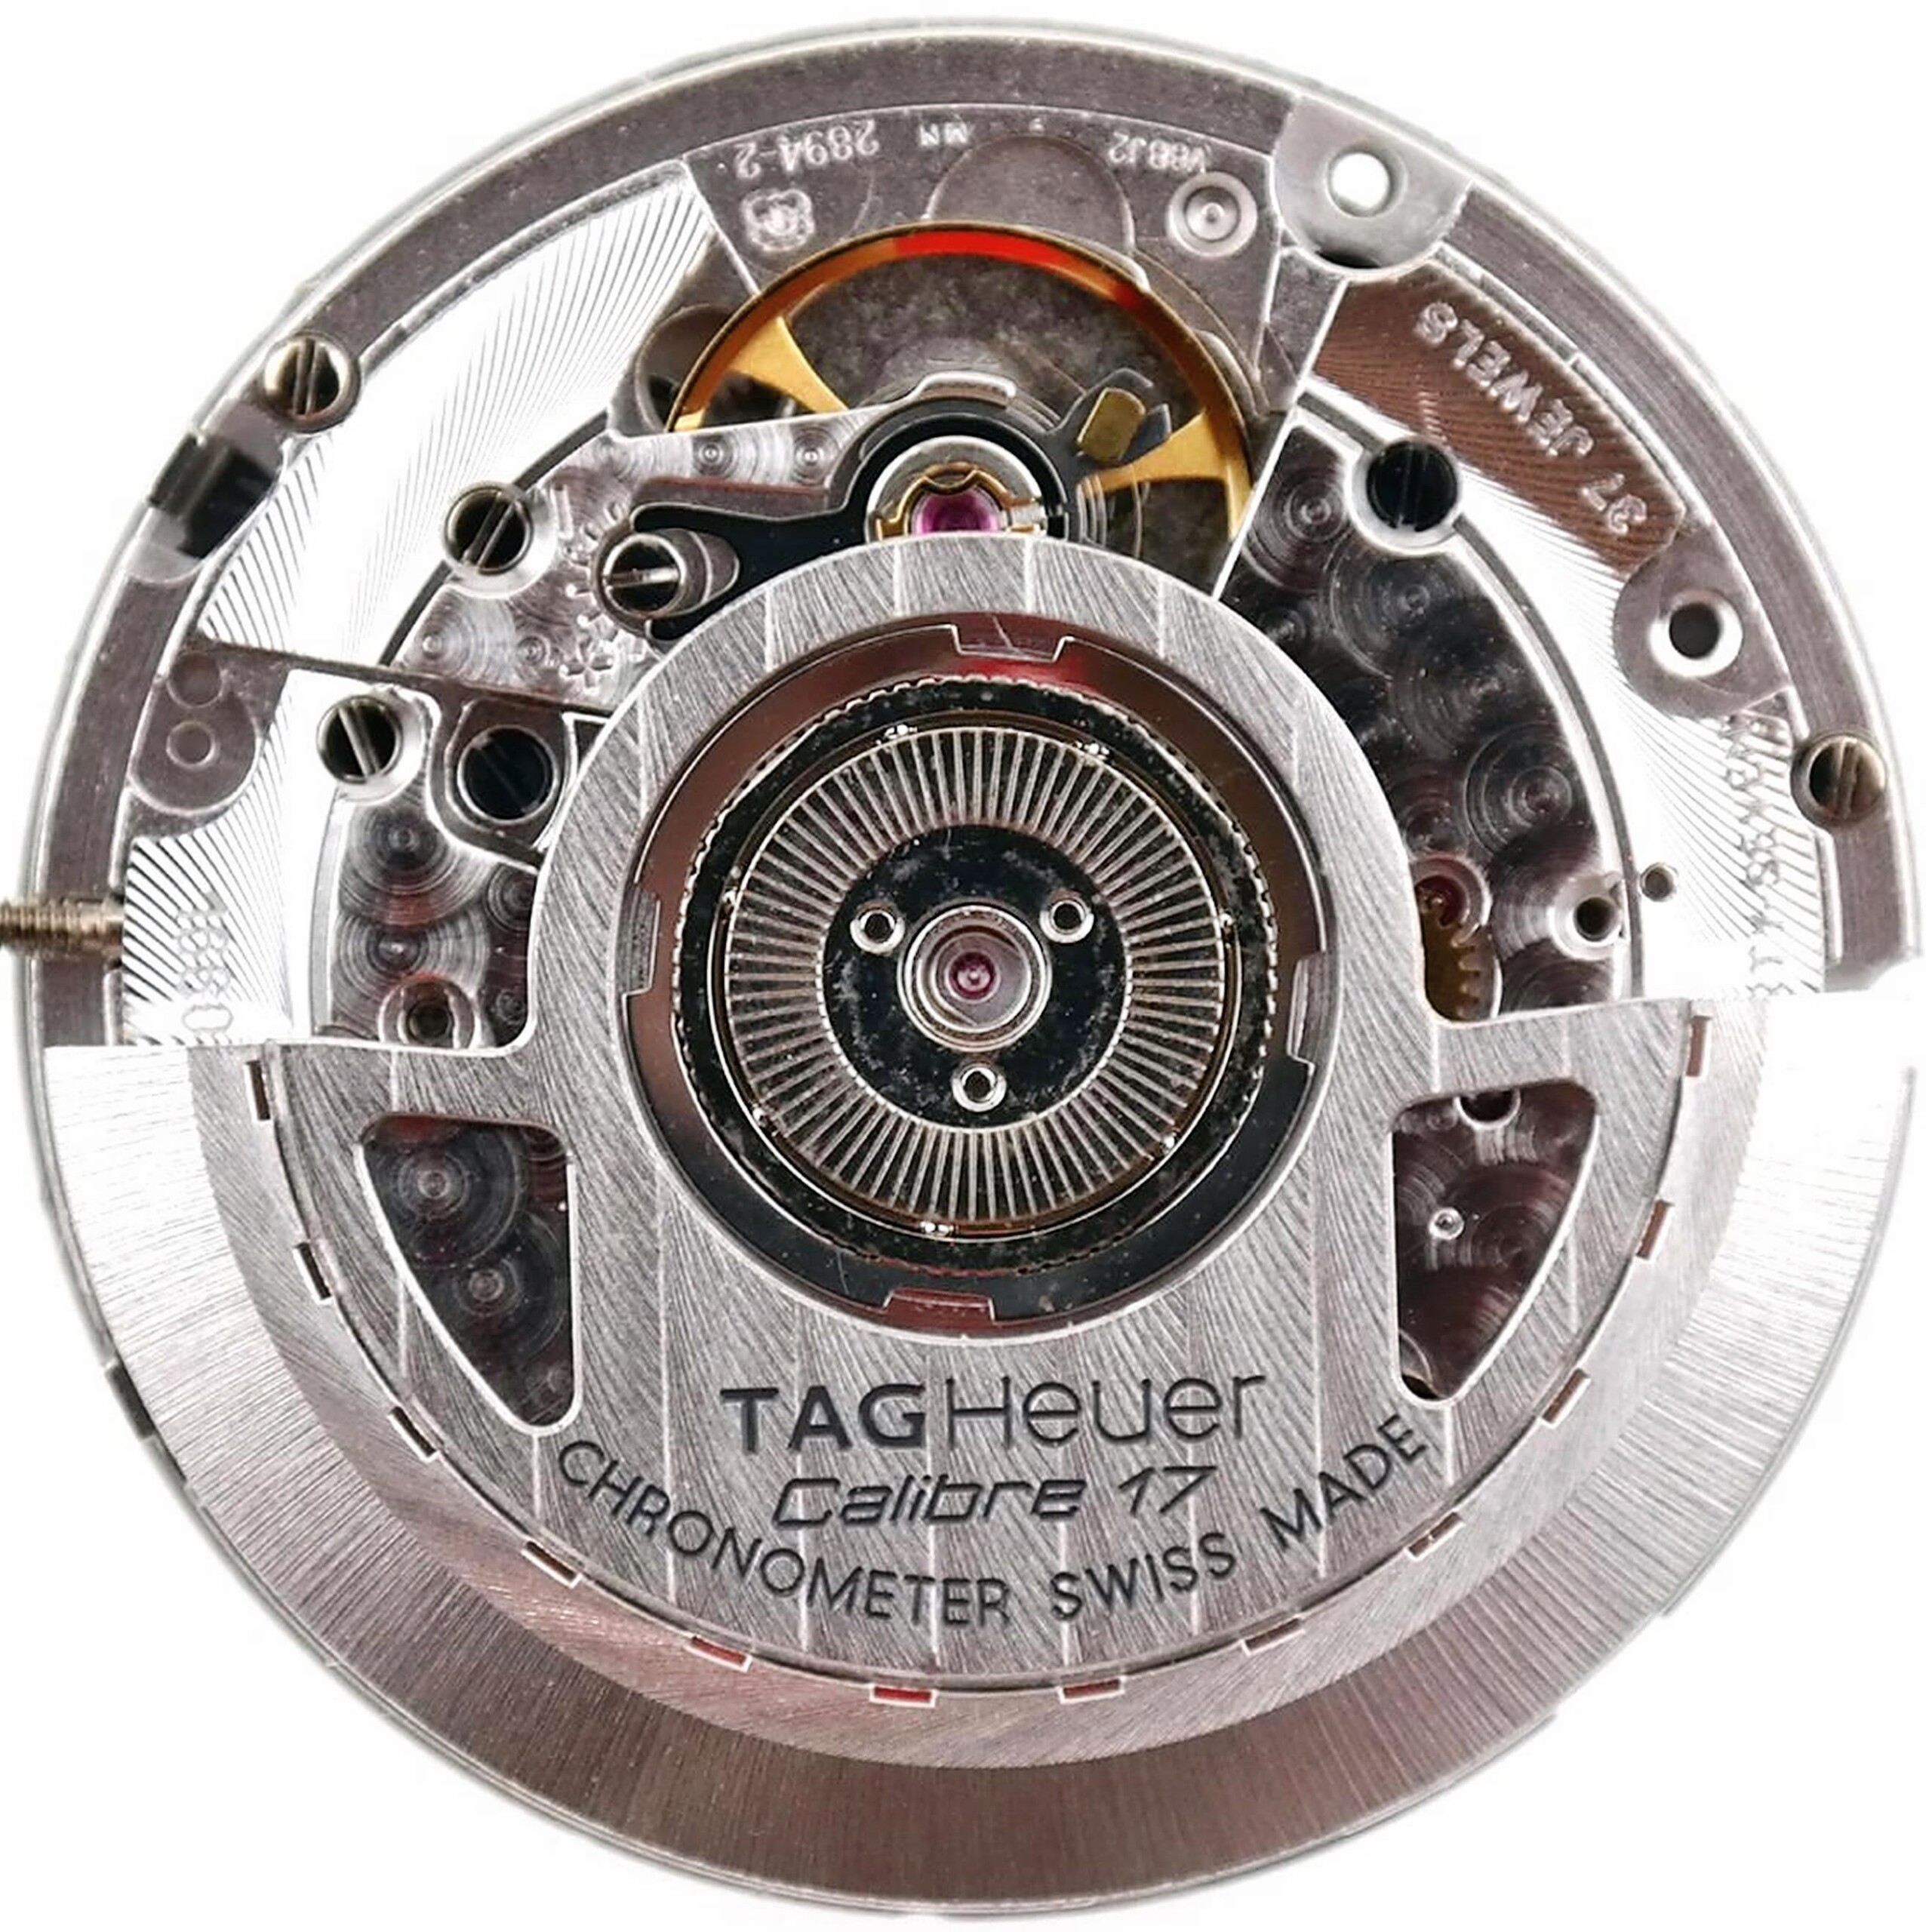 TAG Heuer Calibre 17 RS Automatic Chronograph Chronometer Watch Movement